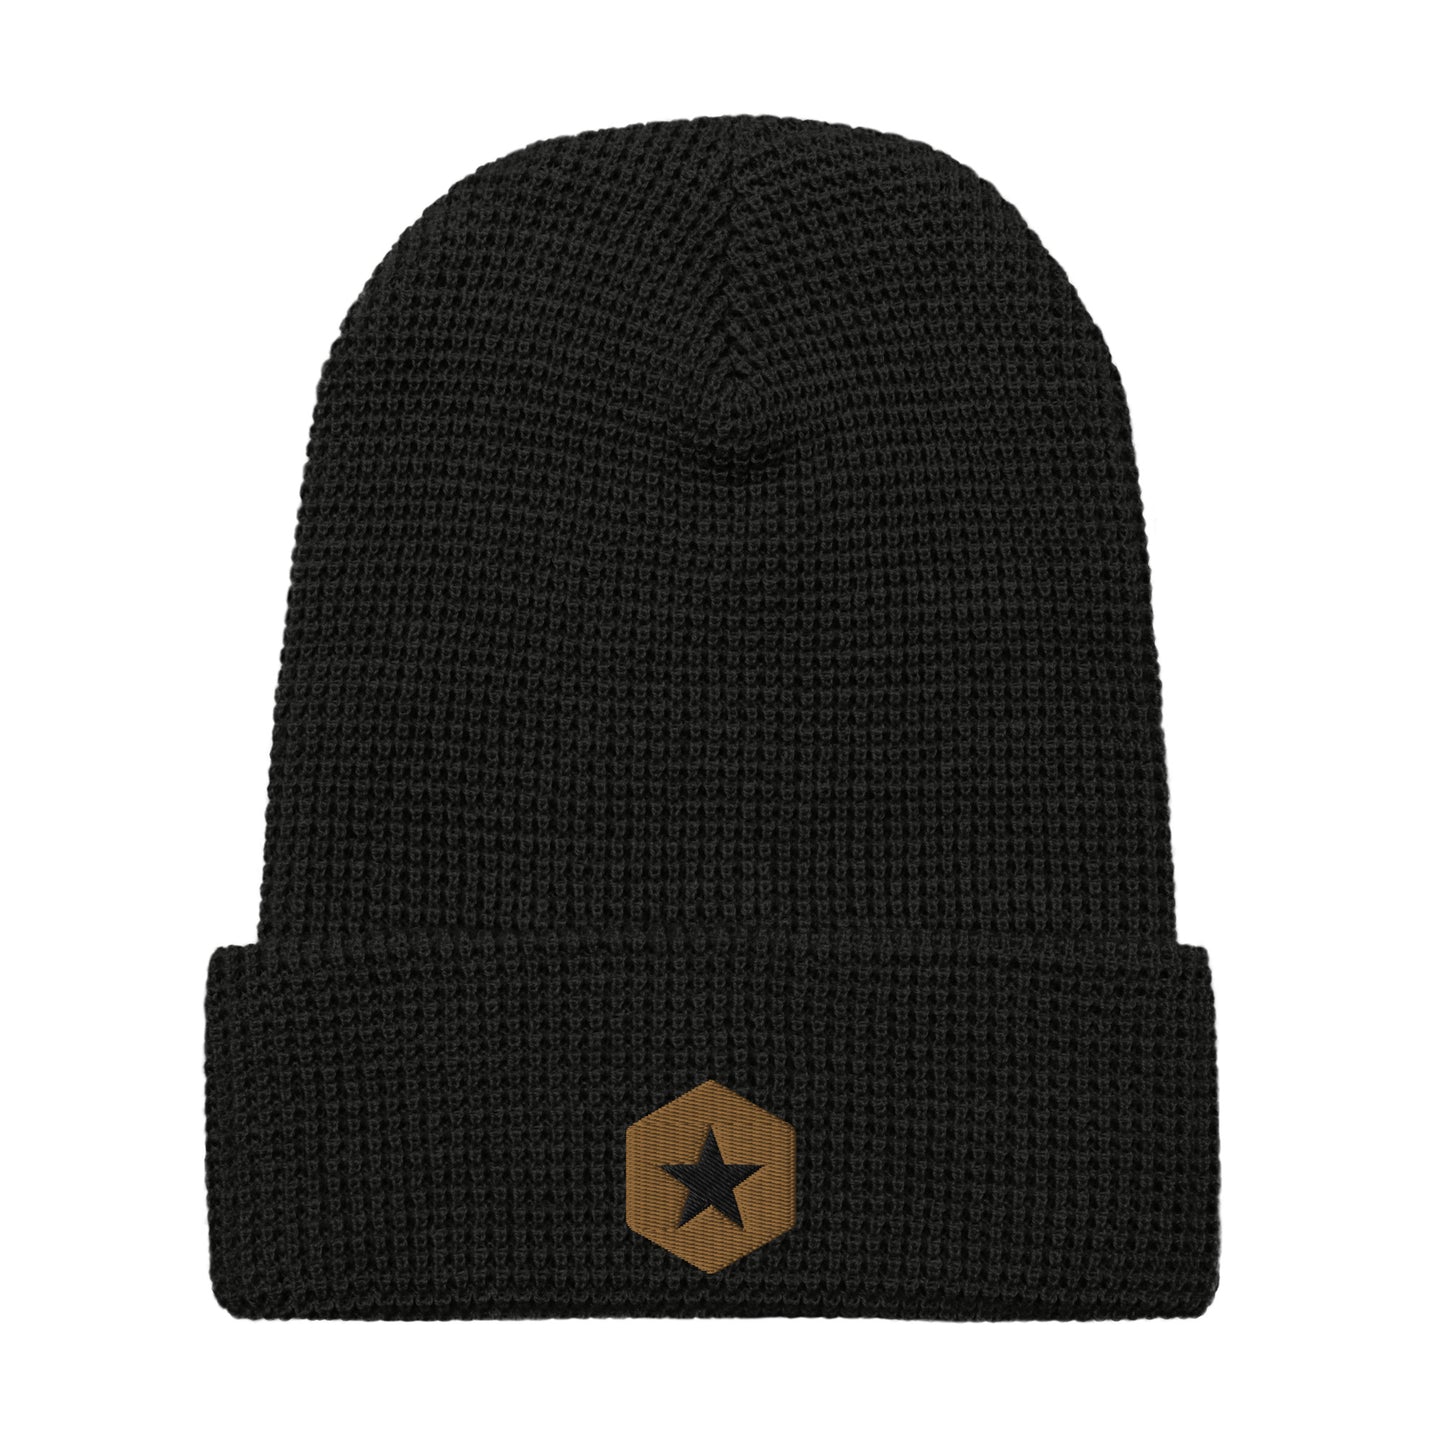 Team Linville Waffle beanie